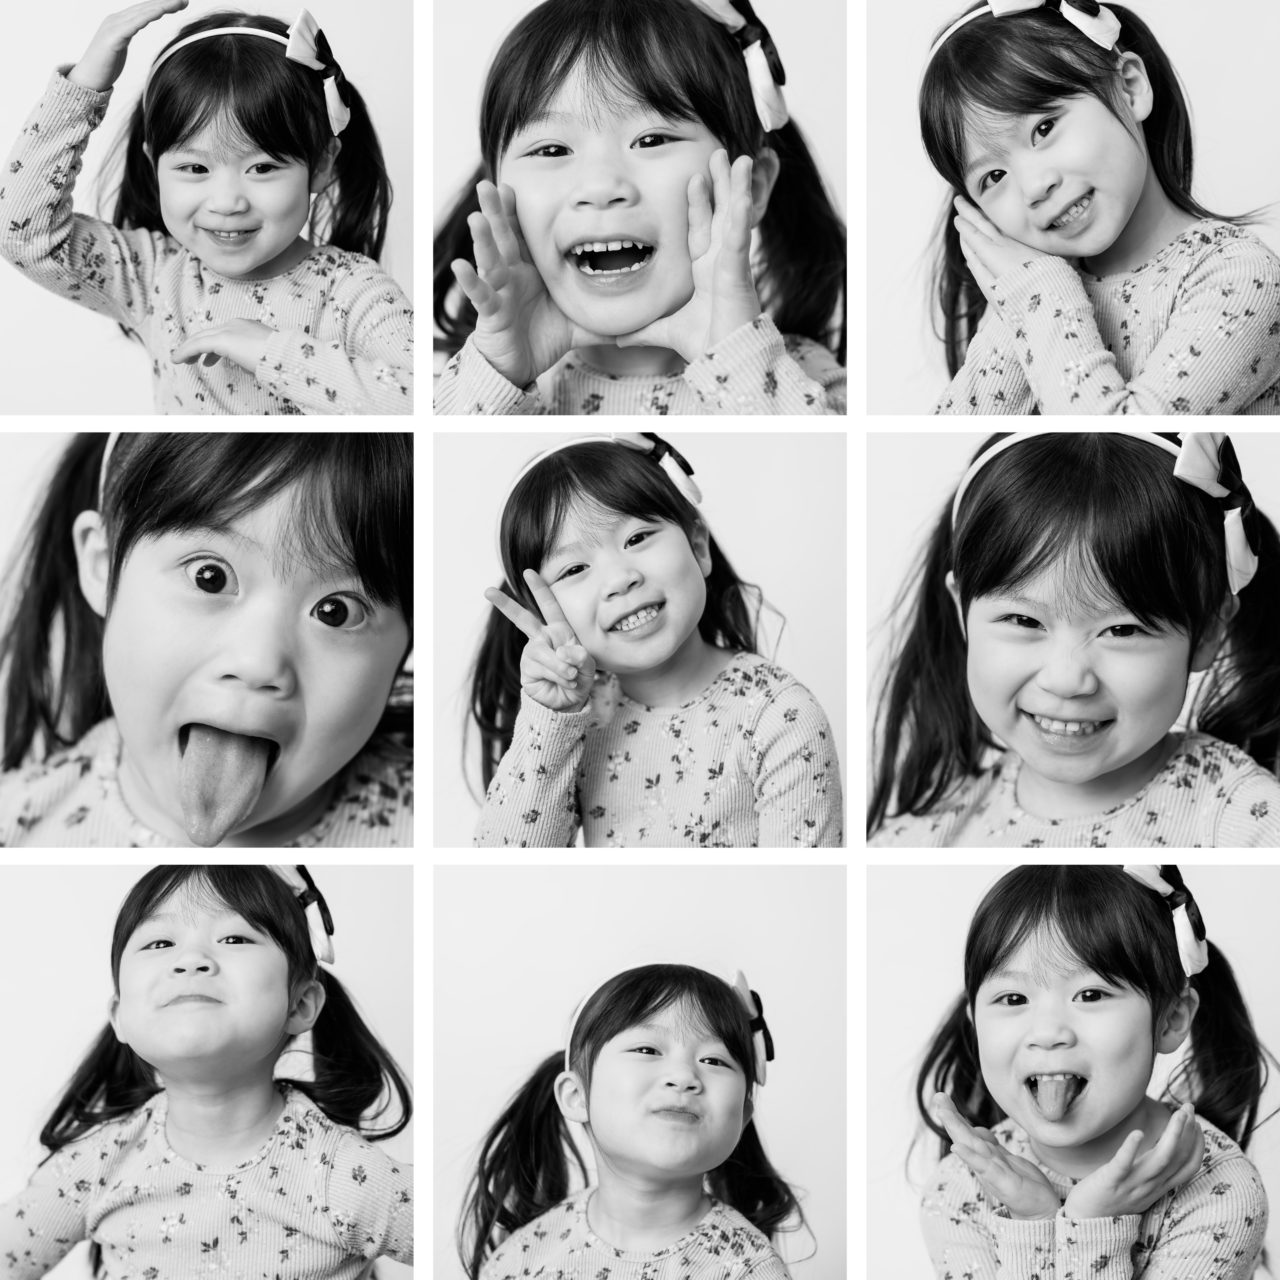 grid of black & white children's portrait photos by Paper Bunny Studios showing different aspects of a kids personality